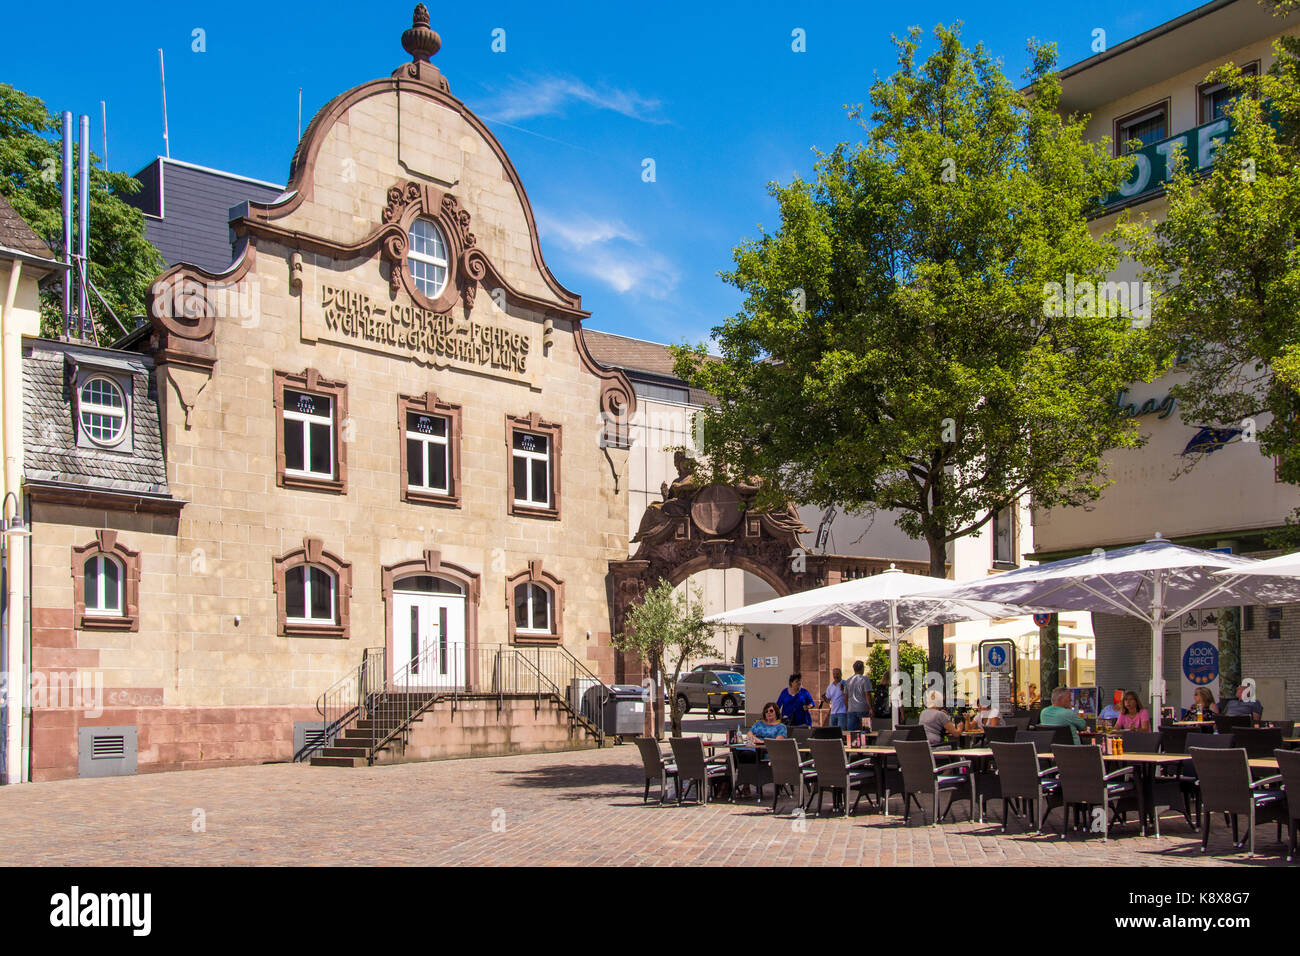 Local people lunching at a cafe in Trier, Germany Stock Photo